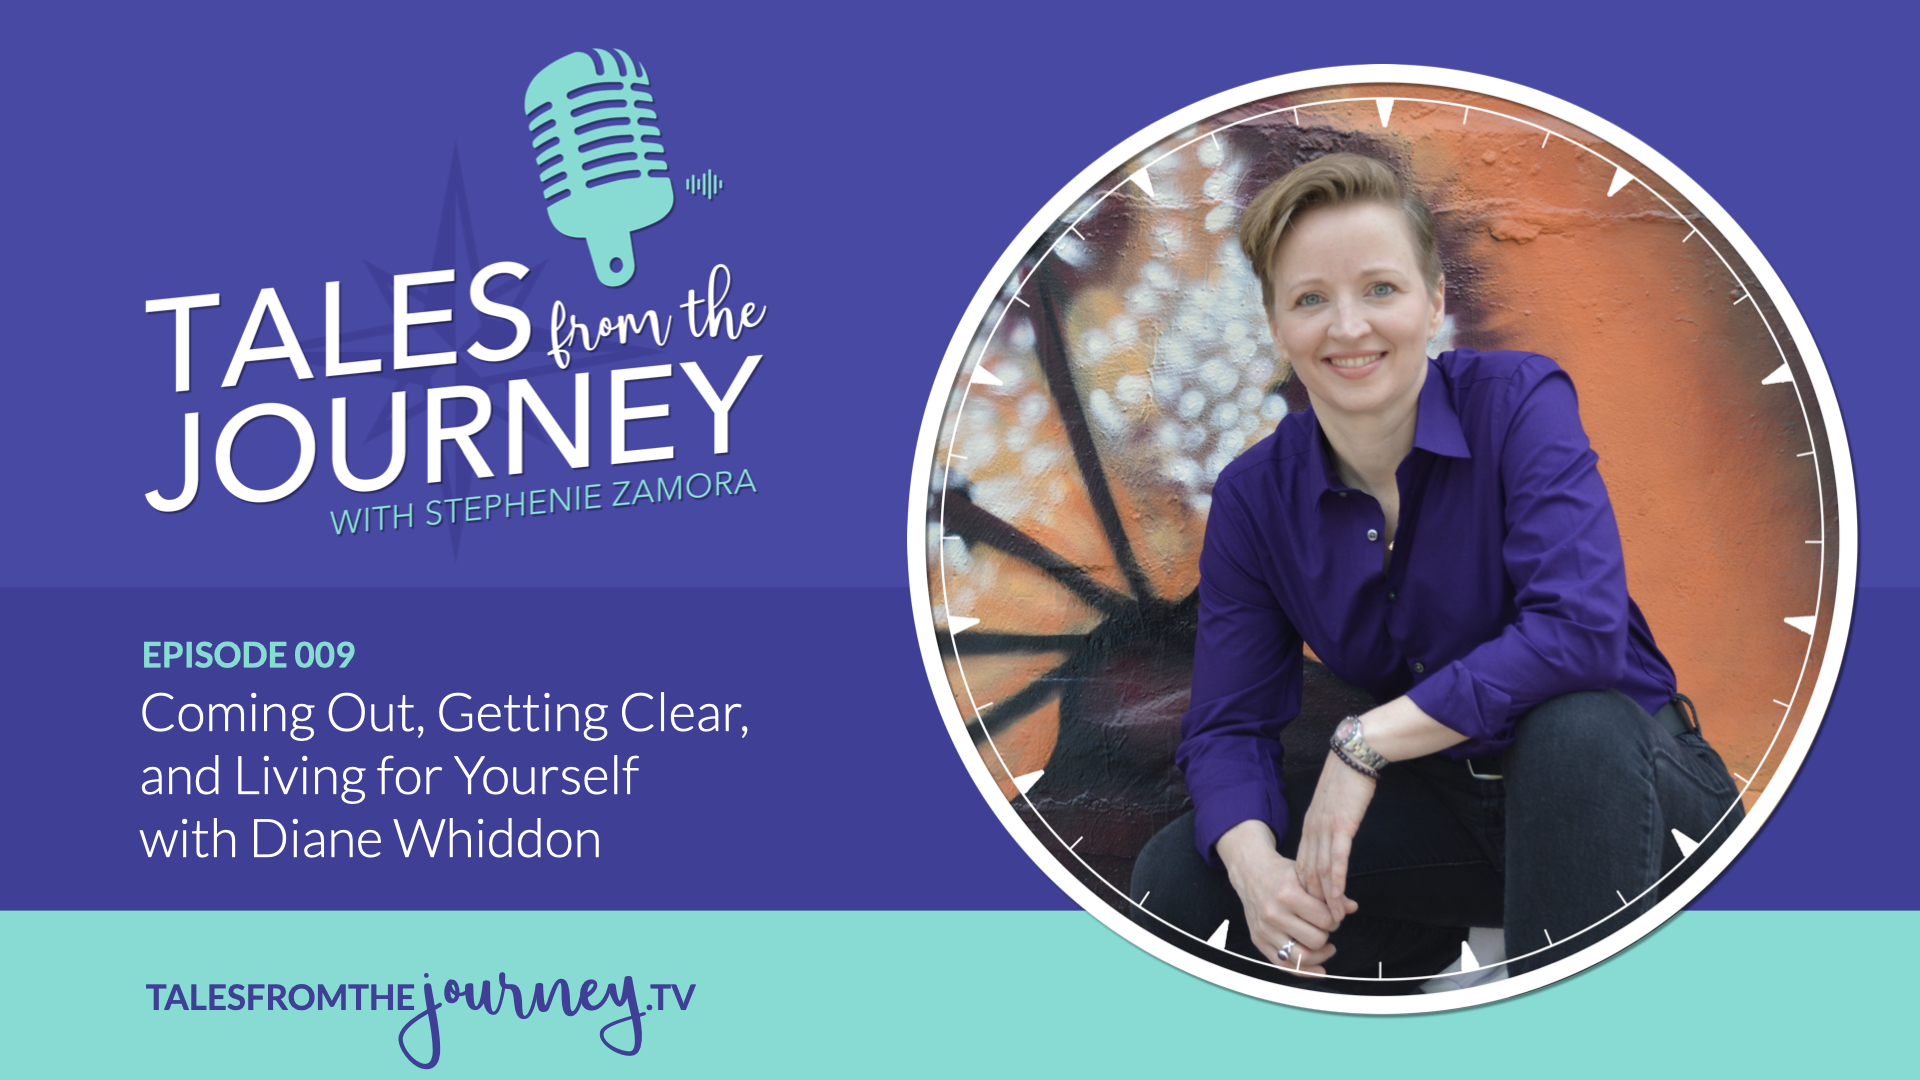 Coming Out, Getting Clear, and Living for Yourself with Diane Whiddon